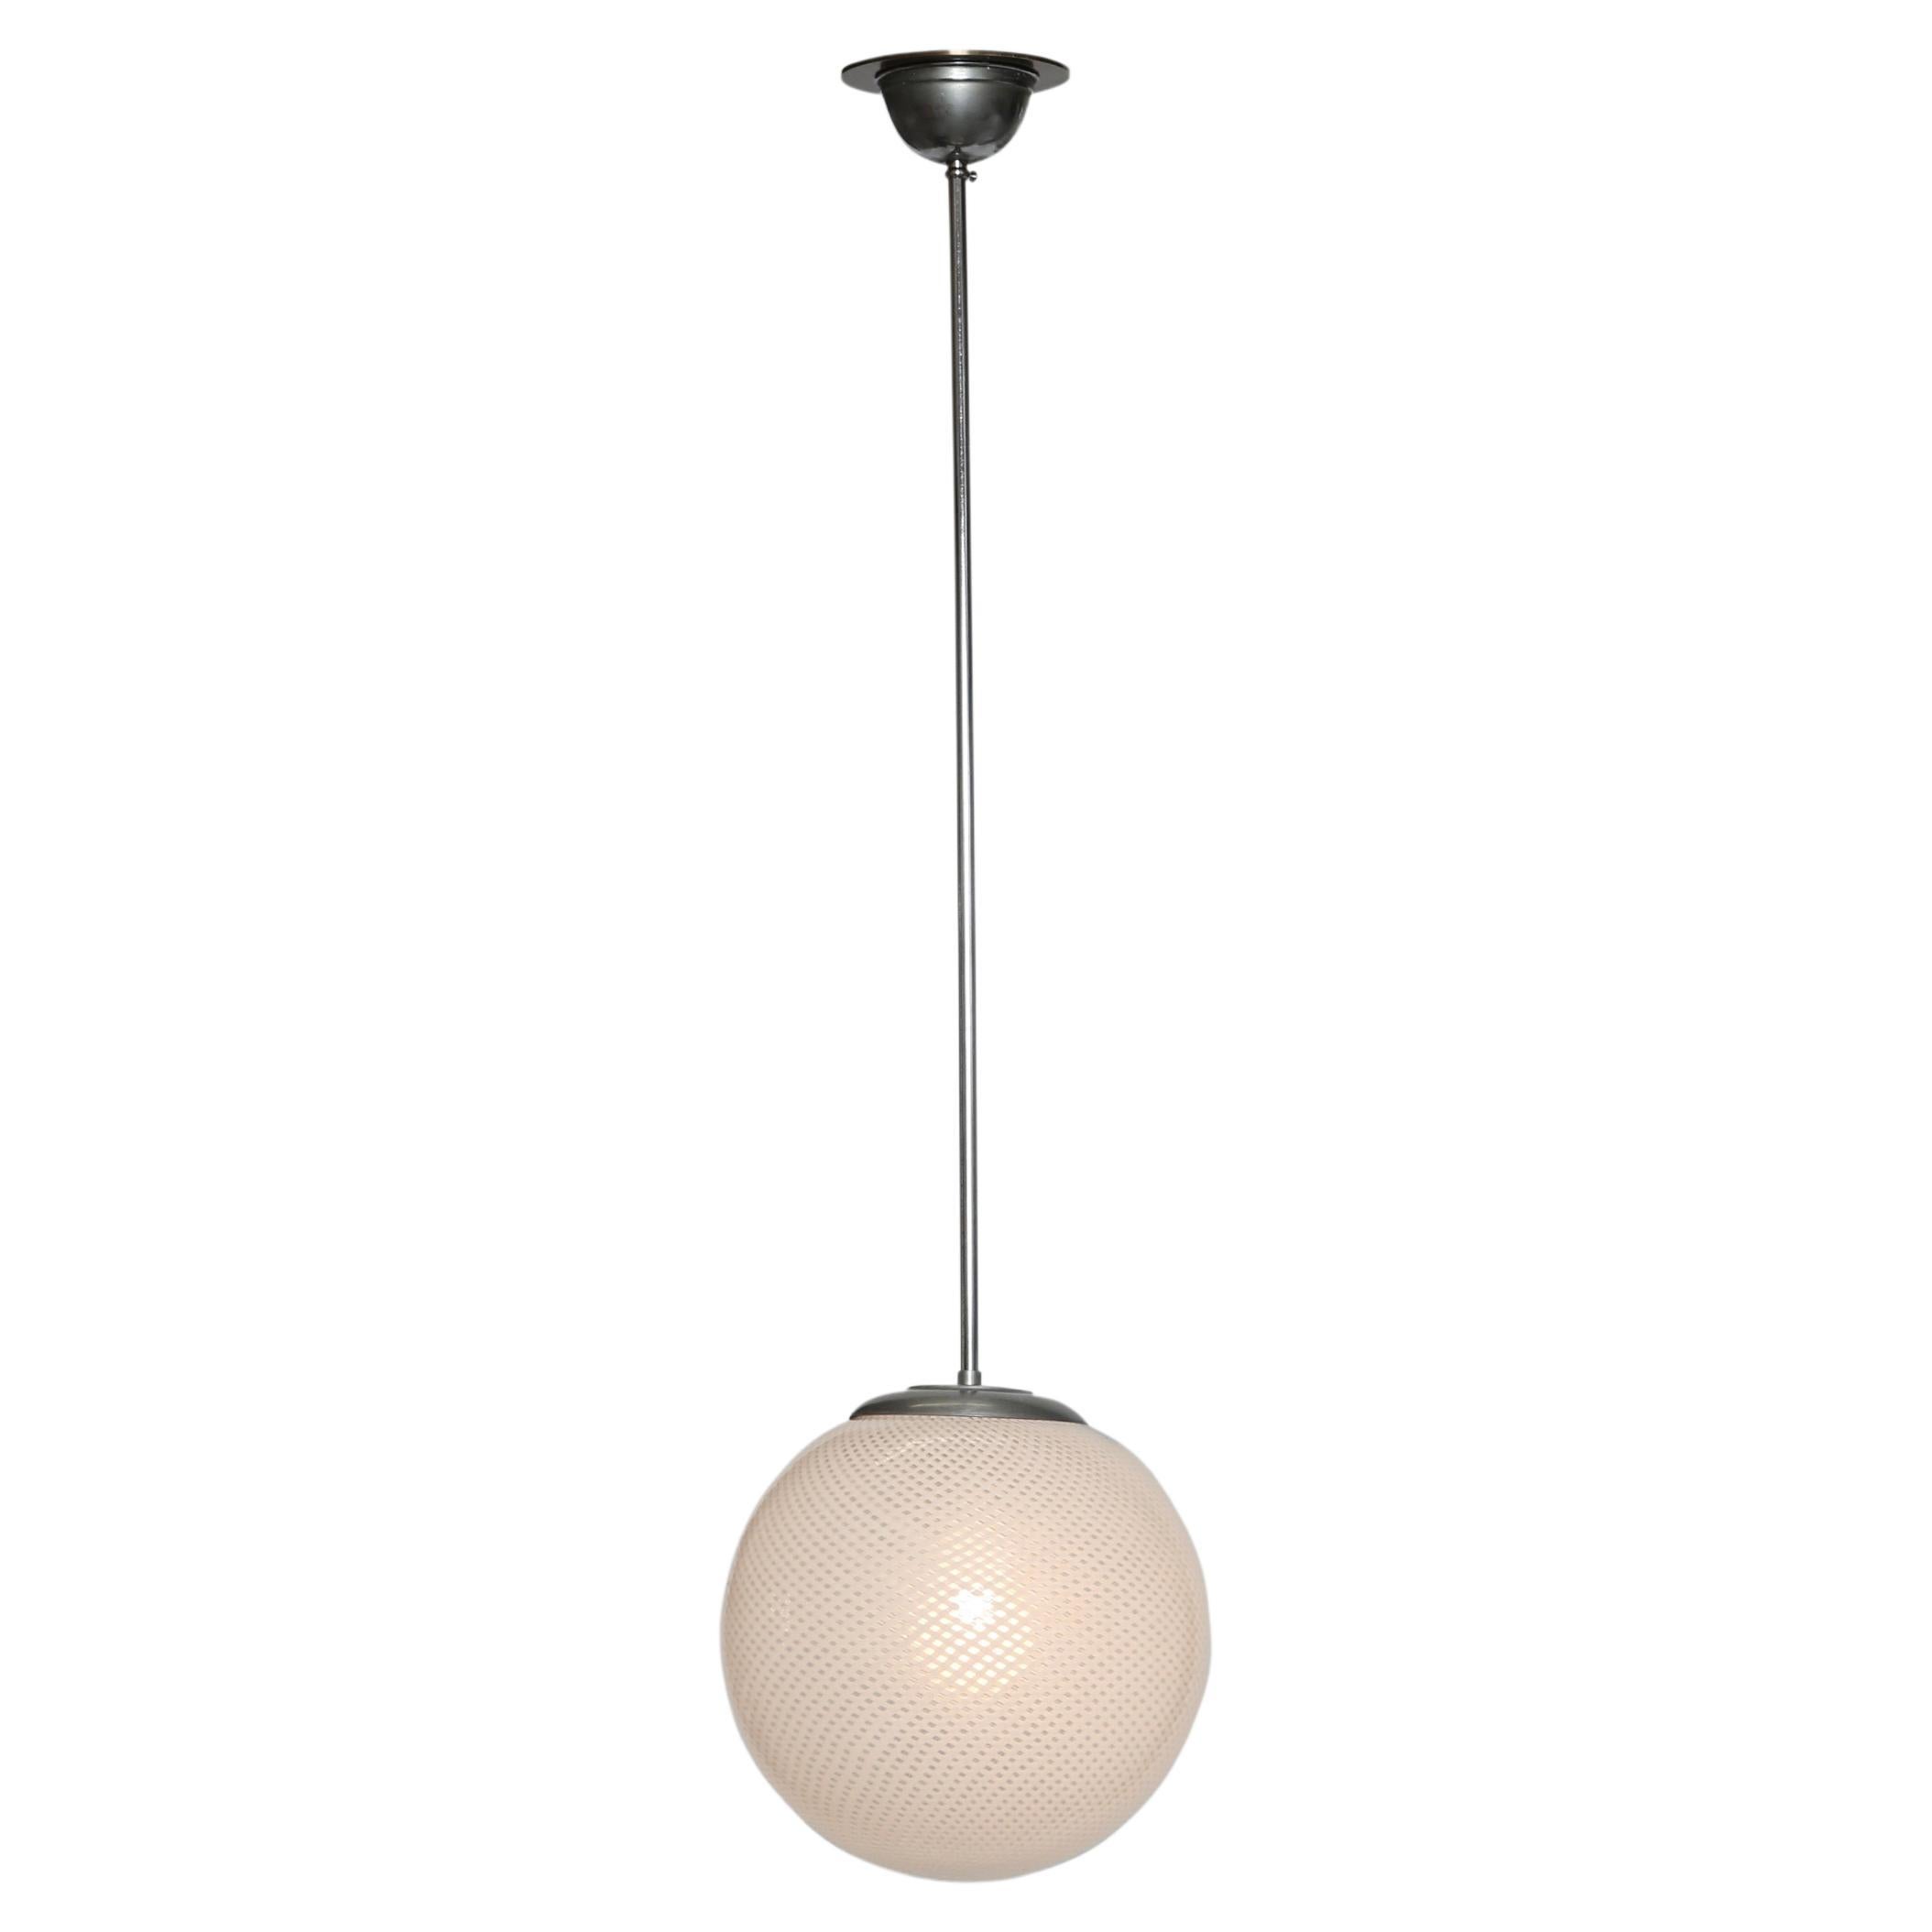 Carlo Scarpa for Venini ceiling lights
Model 5258
Italy 1940s
Handblown glass, brass
Exquisite glass making technique.
Price is for one light.
Four lights are available.

At Illustris Lighting our main focus is to deliver lighting fixtures to our